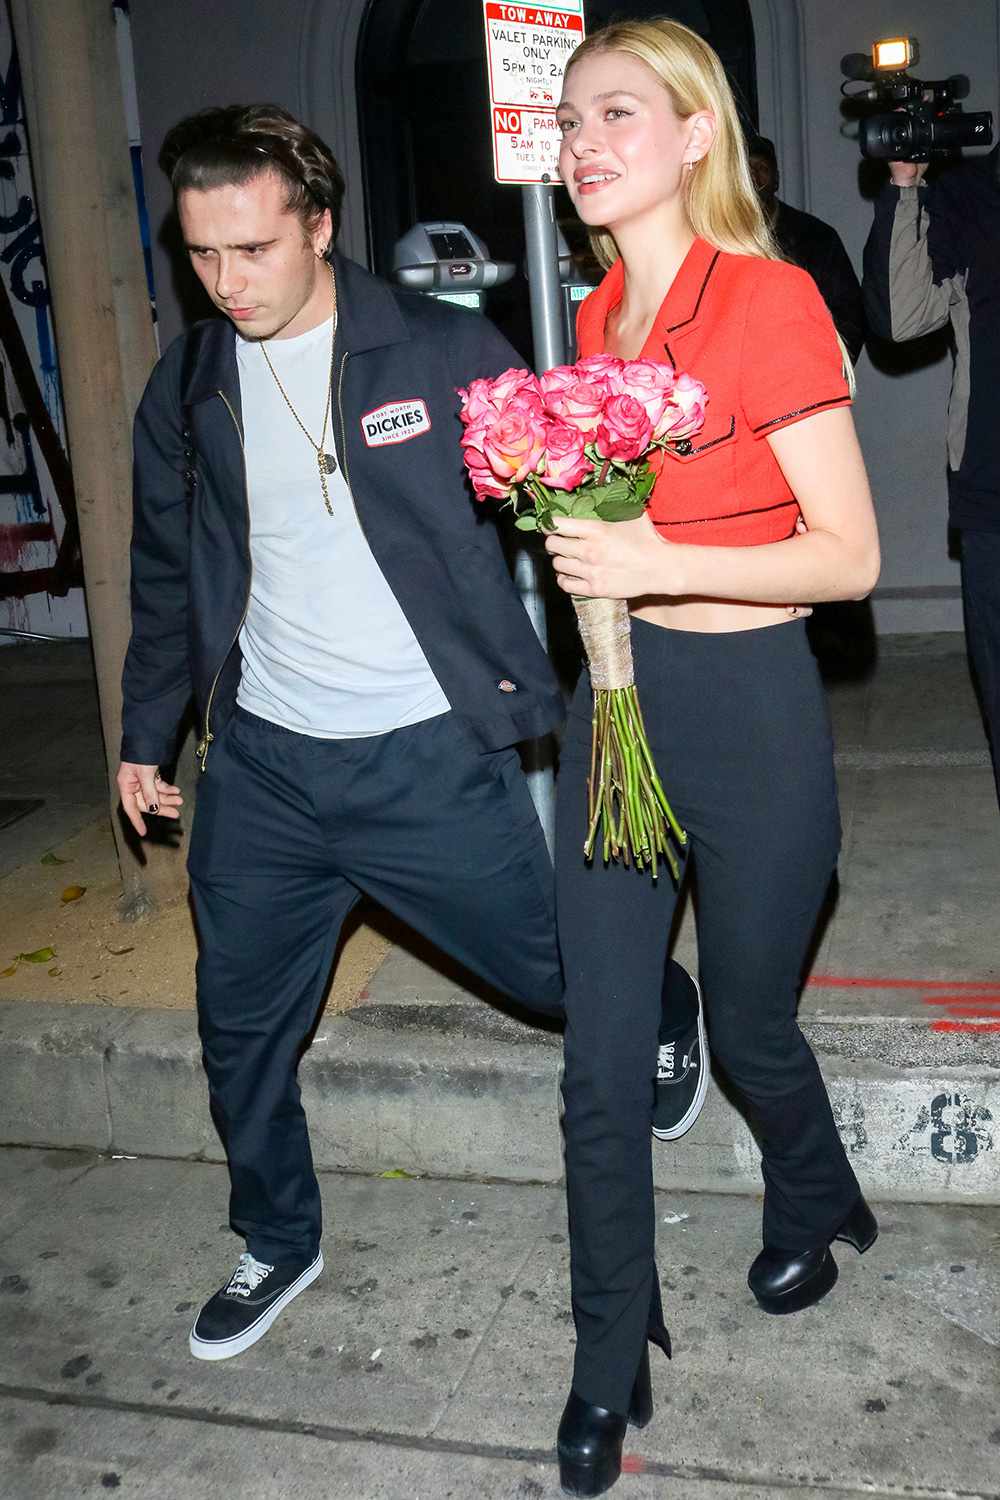 Brooklyn Beckham and Nicola Peltz are seen on January 08, 2020 in Los Angeles